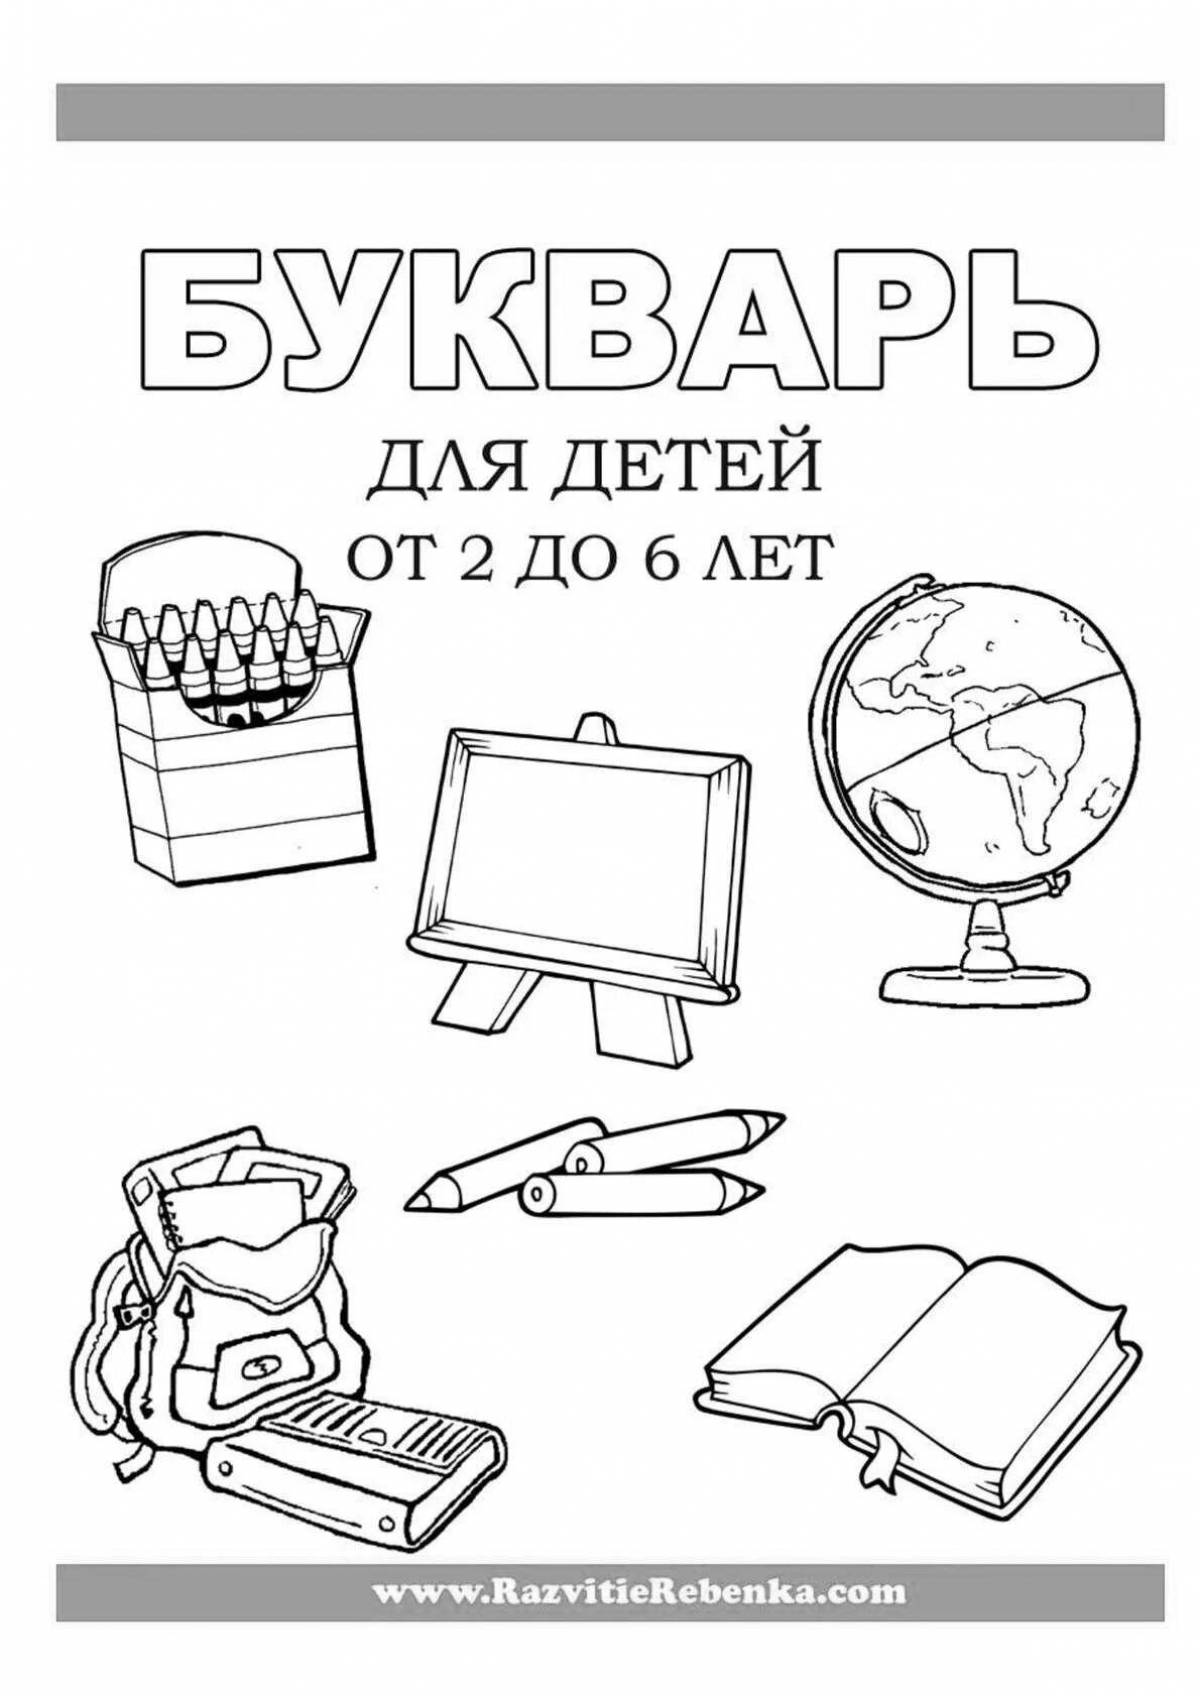 Colorful alphabet coloring page cover